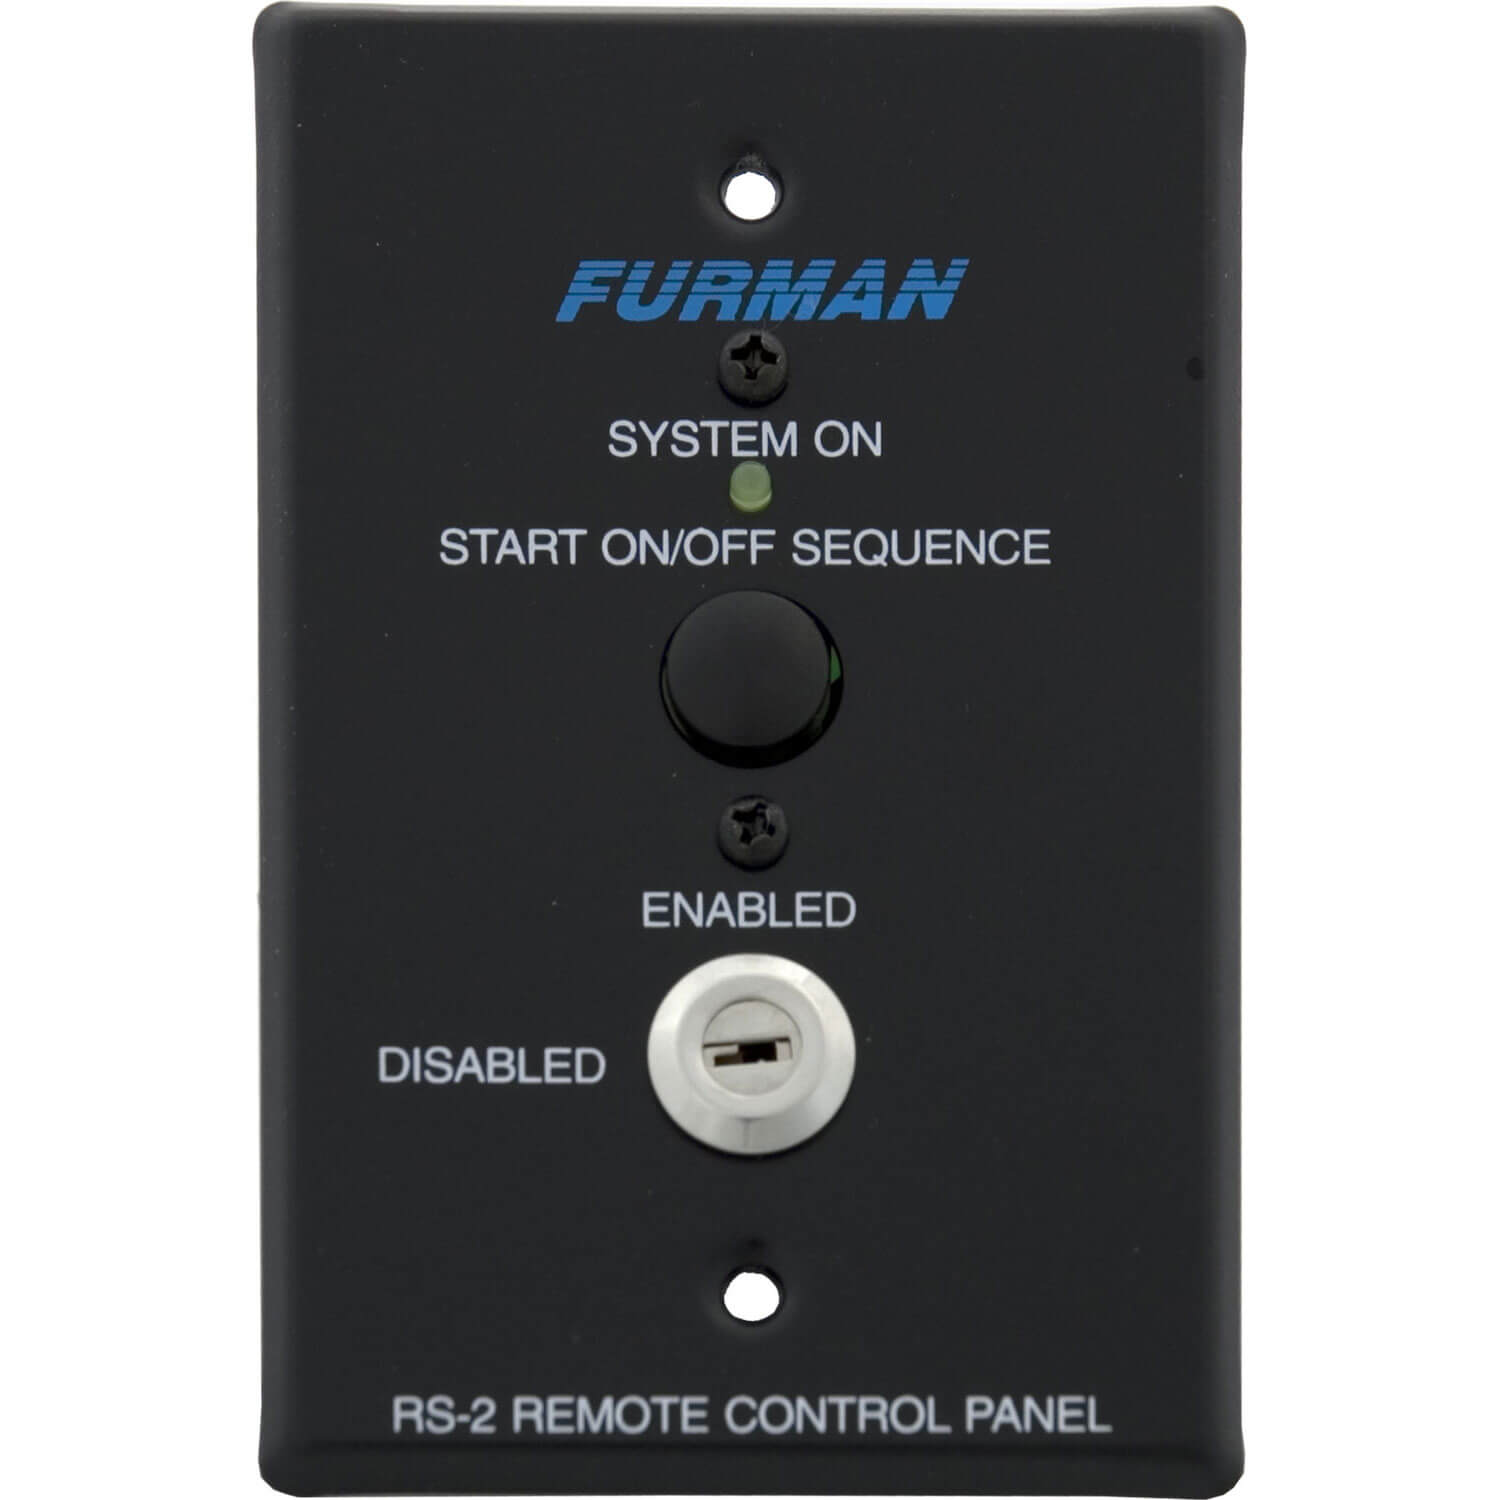 Furman RS-2 - Key Switched Remote System Control Panel w/ Momentary Start